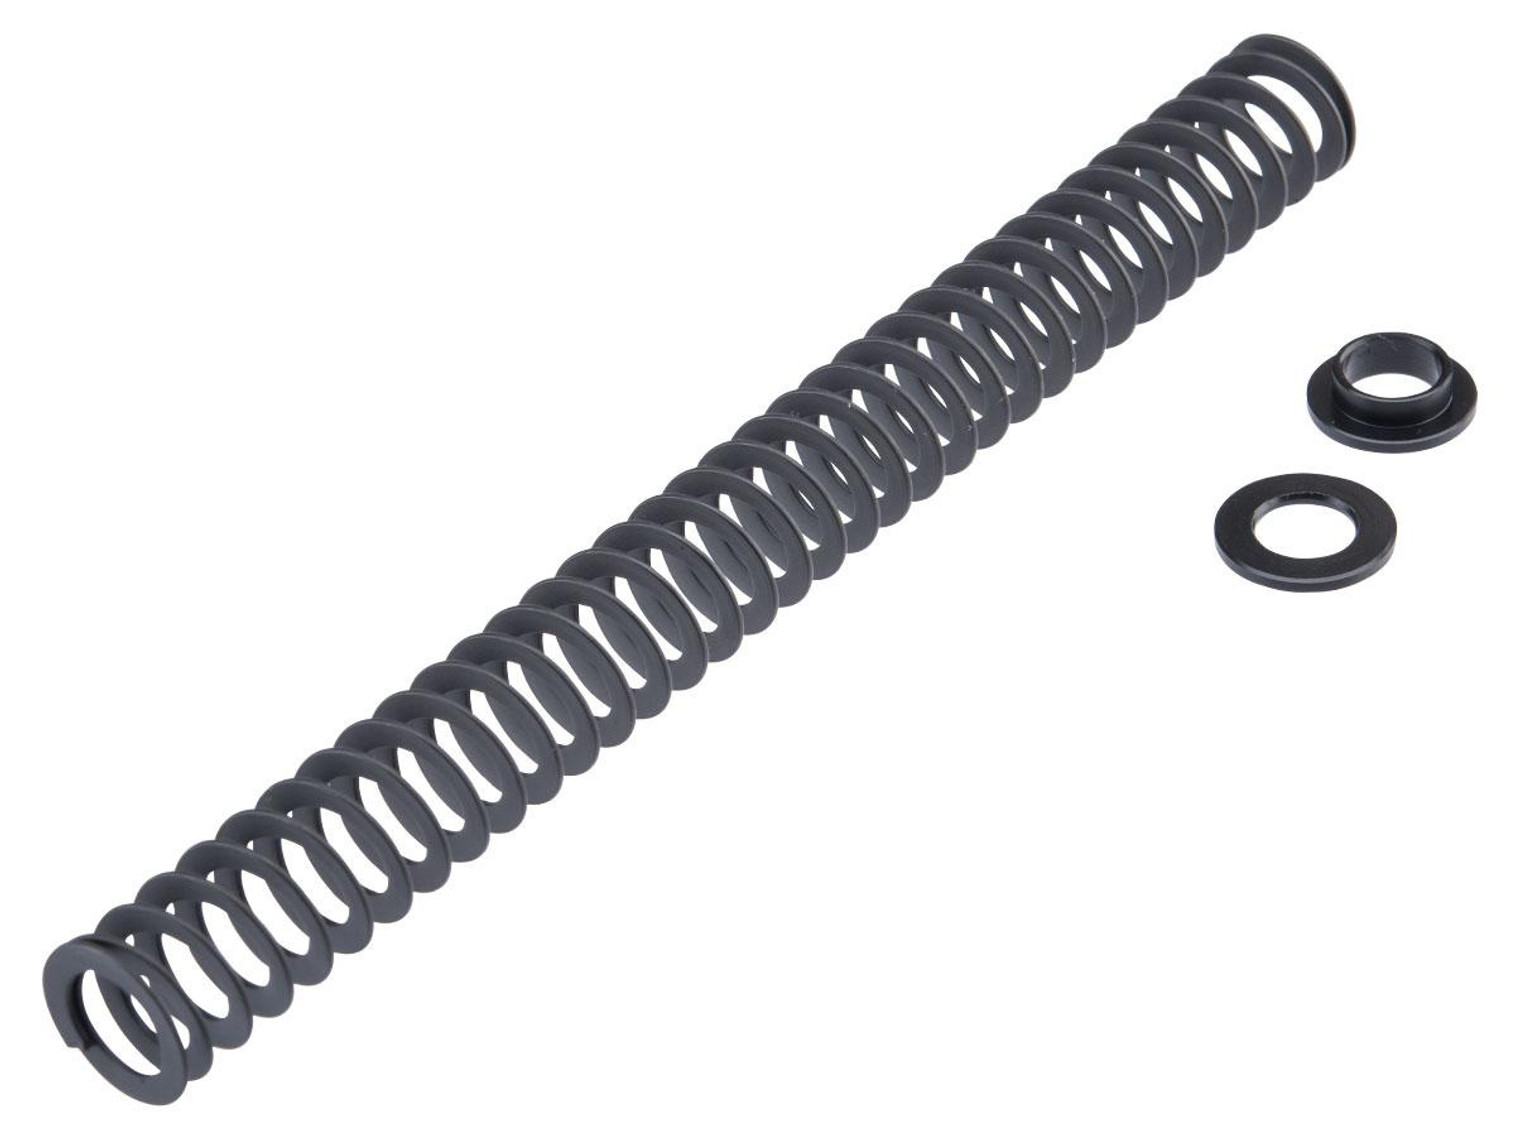 Guarder Enhanced Steel Leaf Recoil Spring for Airsoft Gas Blowback Pistols